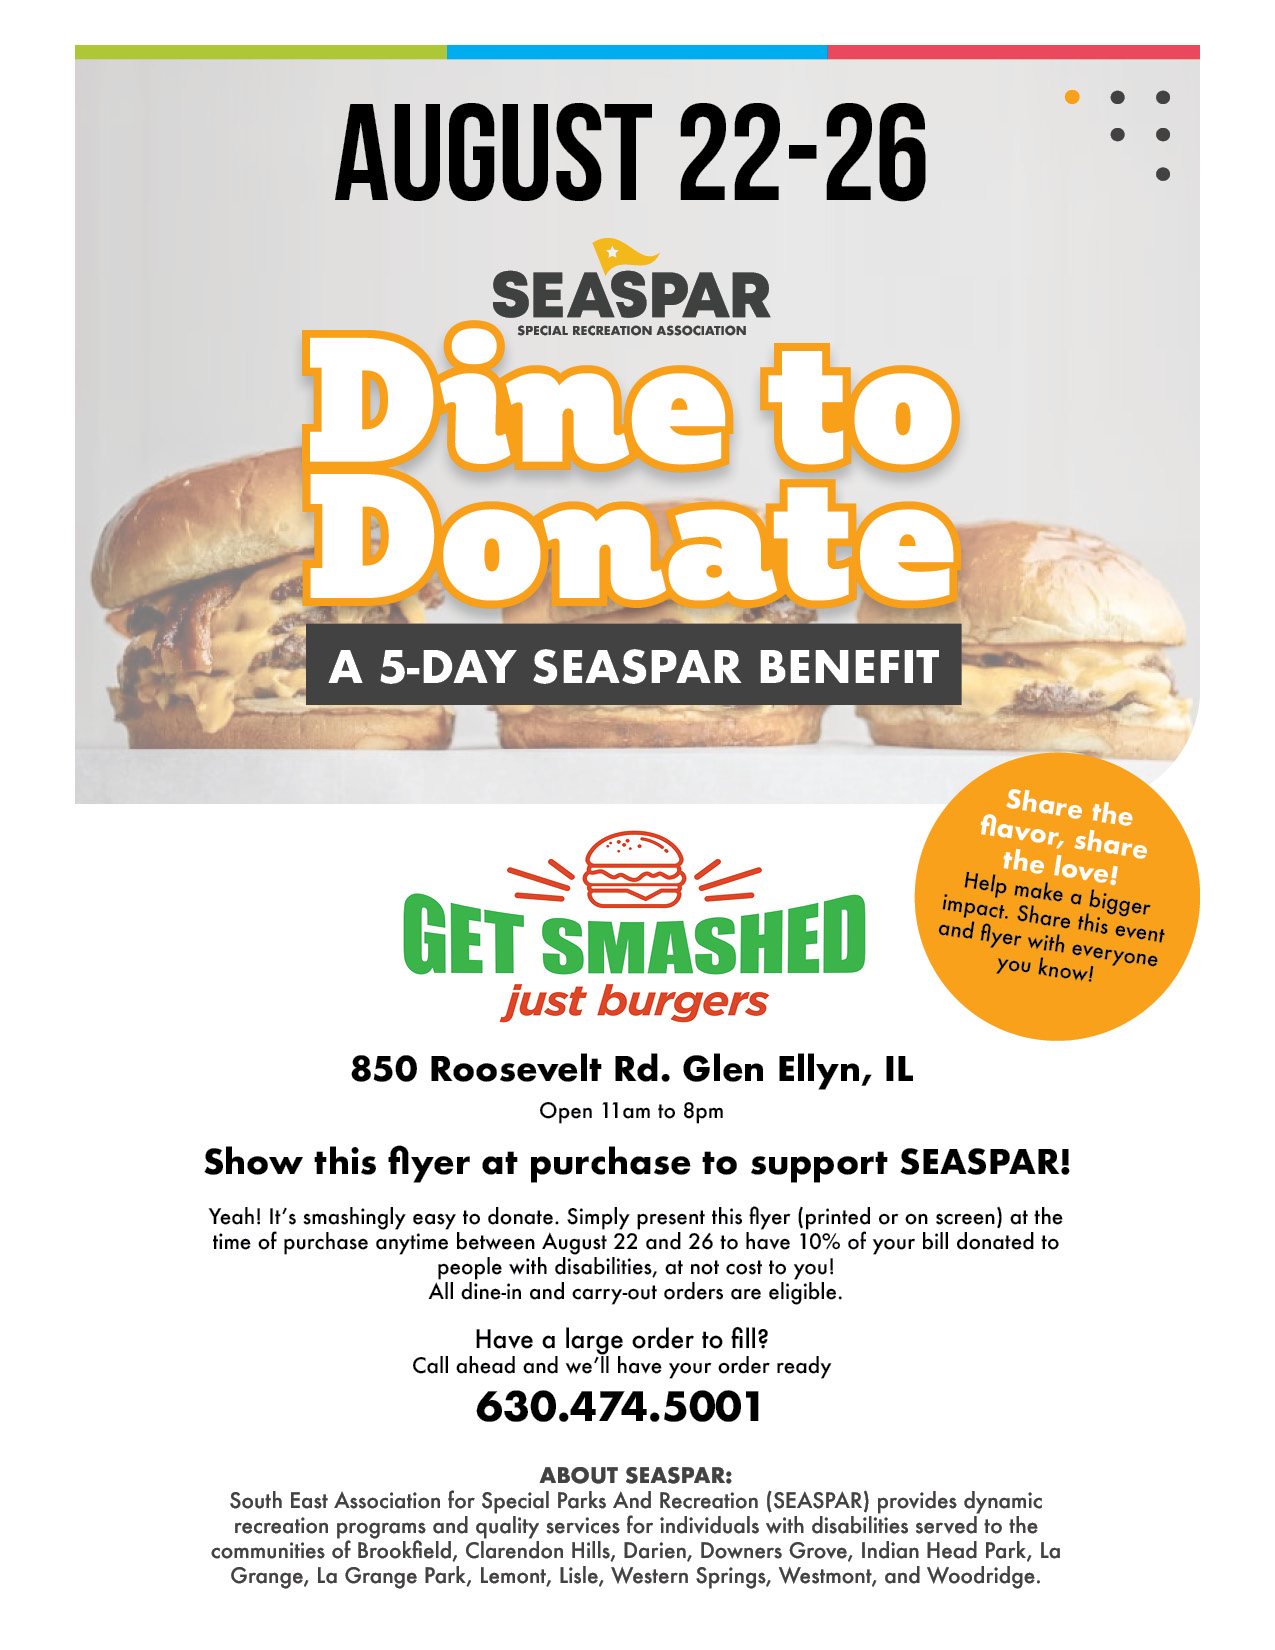 SEASPAR Dine to Donate: Get Smashed event flyer. Provide this at purchase to earn SEASPAR 10% of your purchase in donations. 